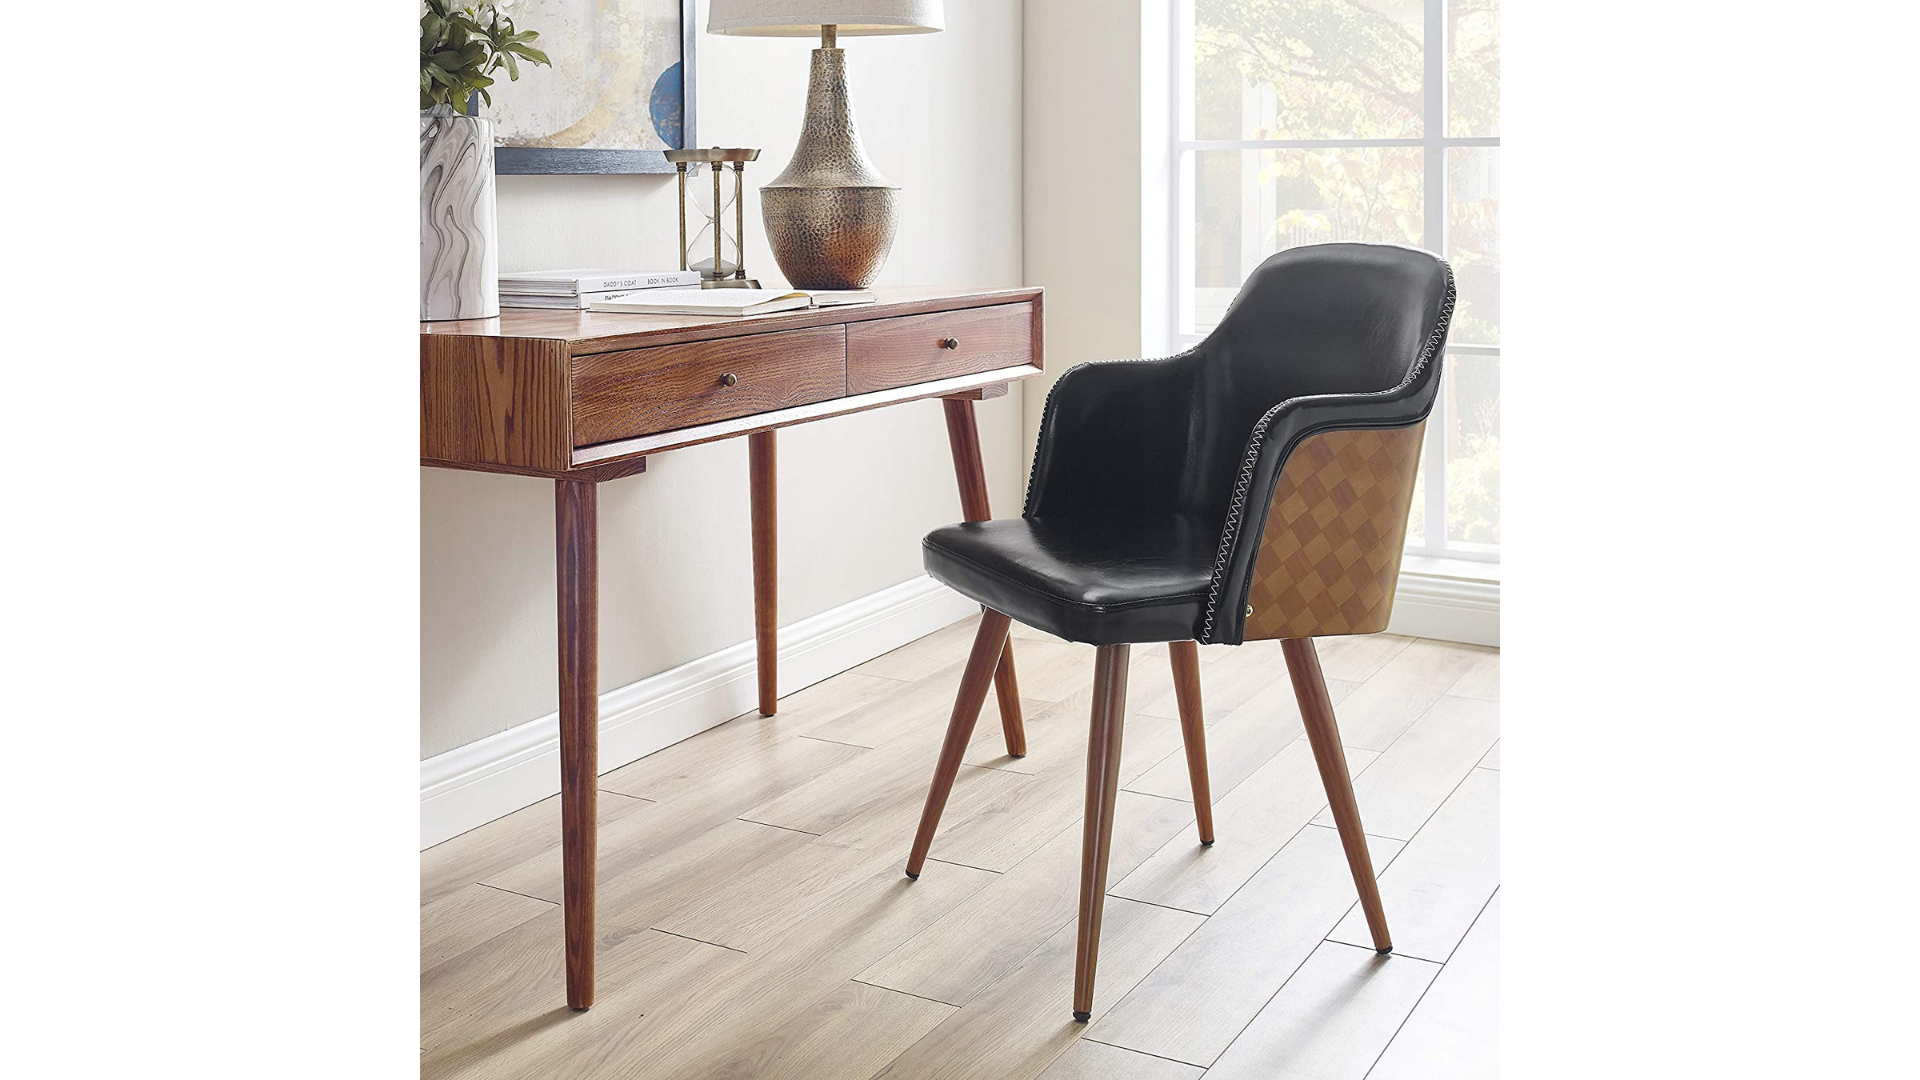 15 Best Desk Chairs With No Wheels, Brown Leather Desk Chair No Wheels